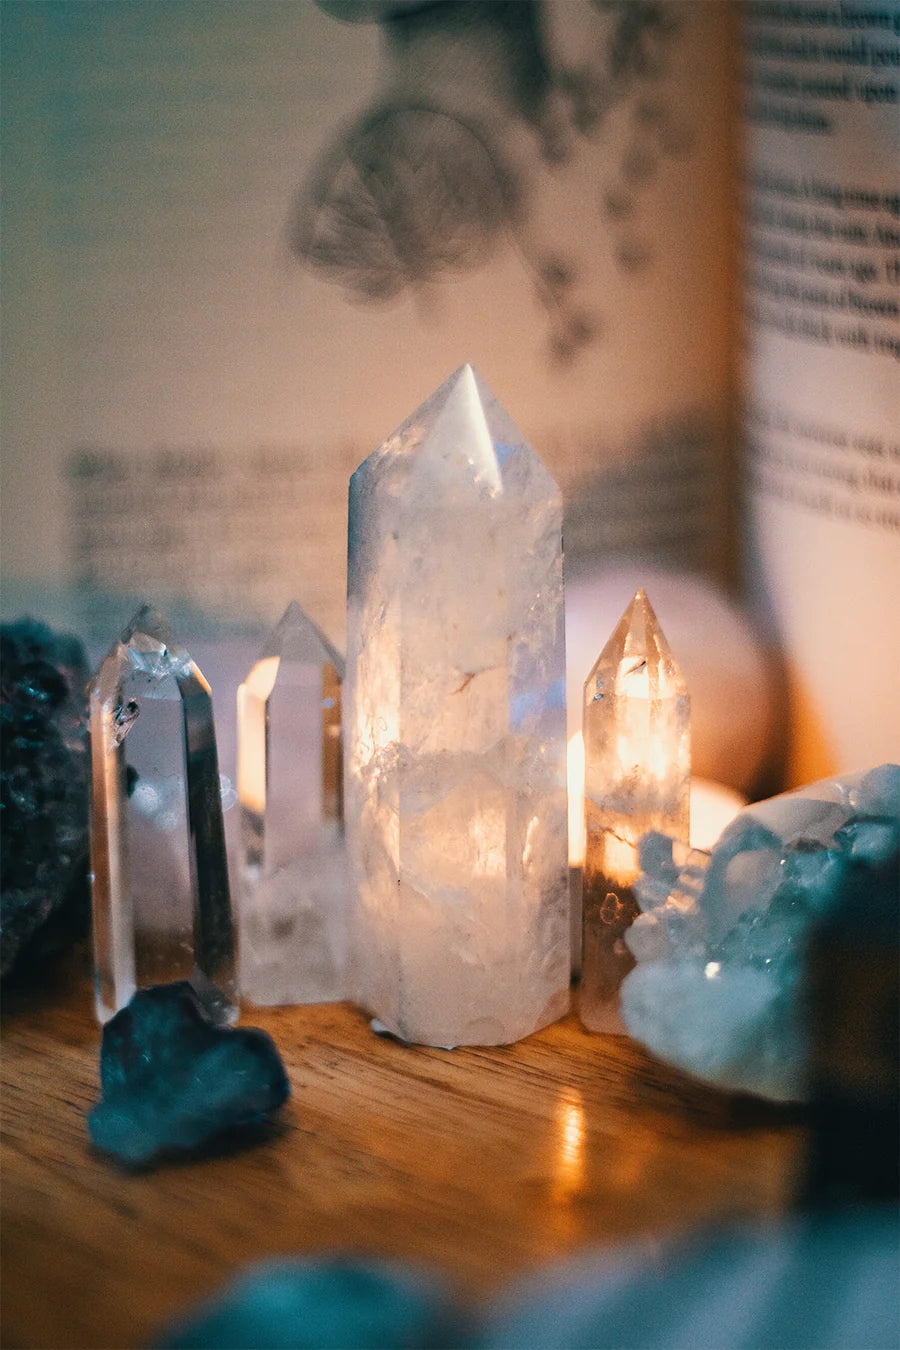 The best way to meditate with crystals